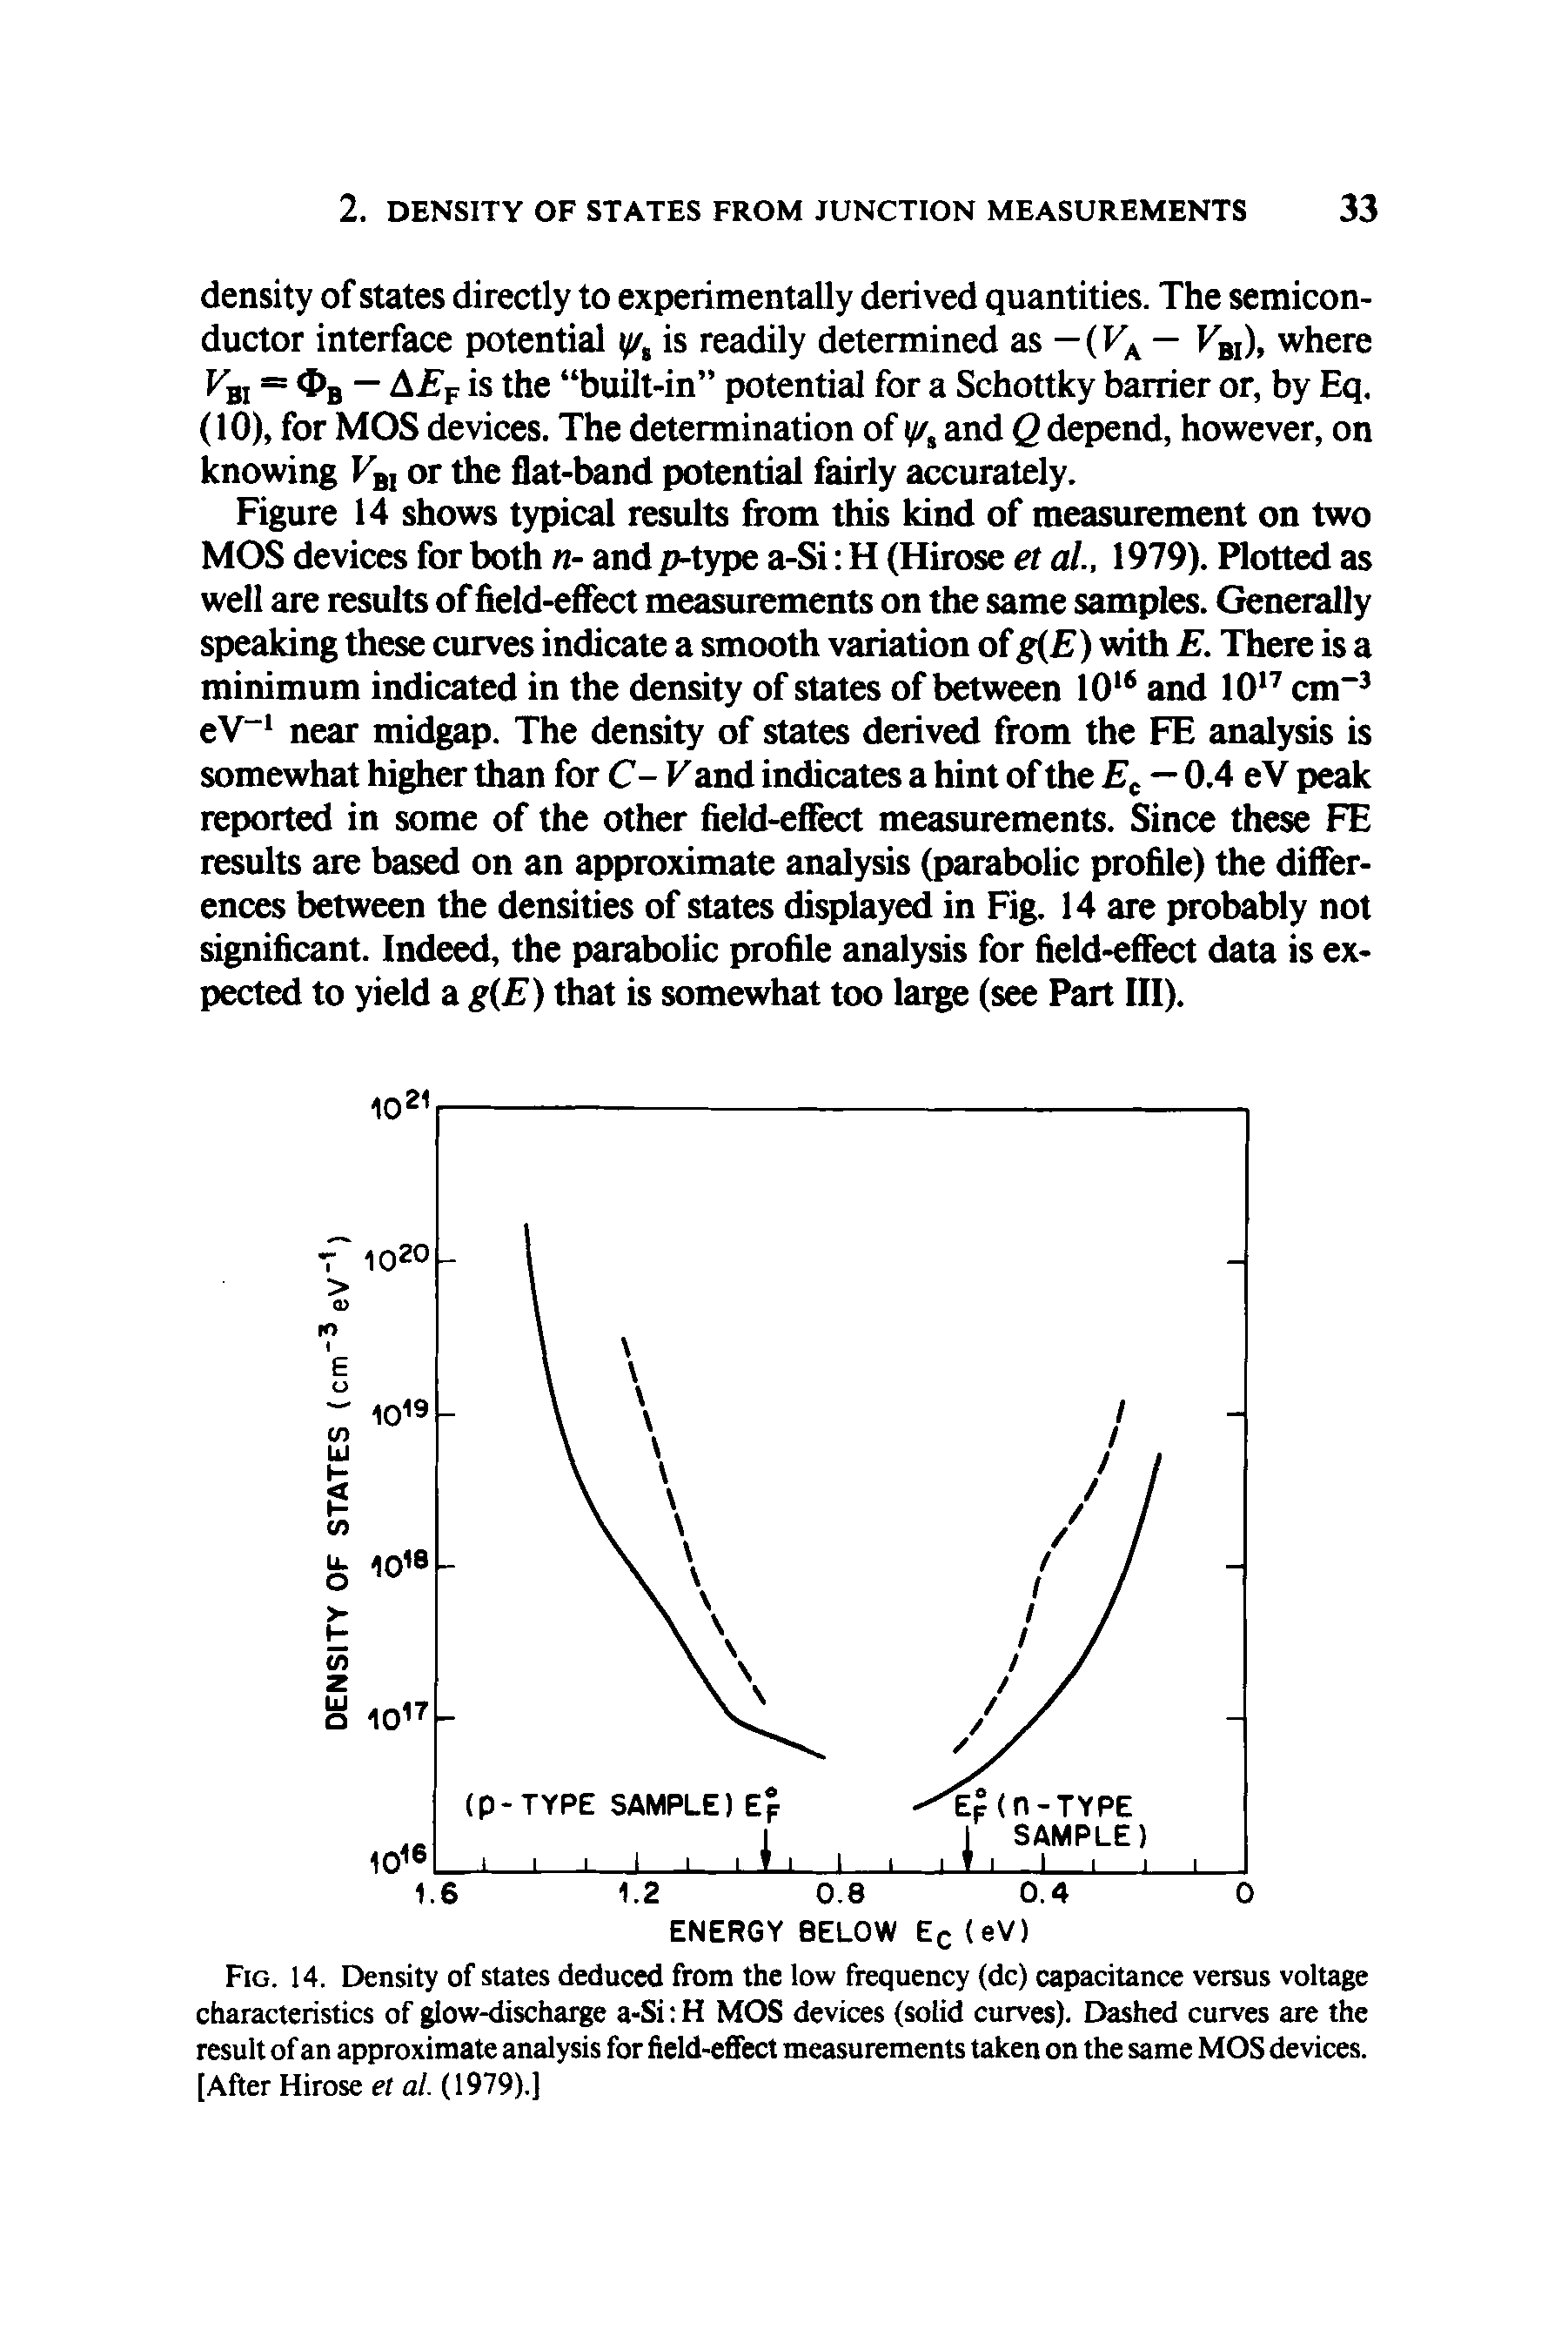 Fig. 14. Density of states deduced from the low frequency (dc) capacitance versus voltage characteristics of glow-discharge a-Si H MOS devices (solid curves). Dashed curves are the result of an approximate analysis for field-effect measurements taken on the same MOS devices. [After Hirose et al. (1979).]...